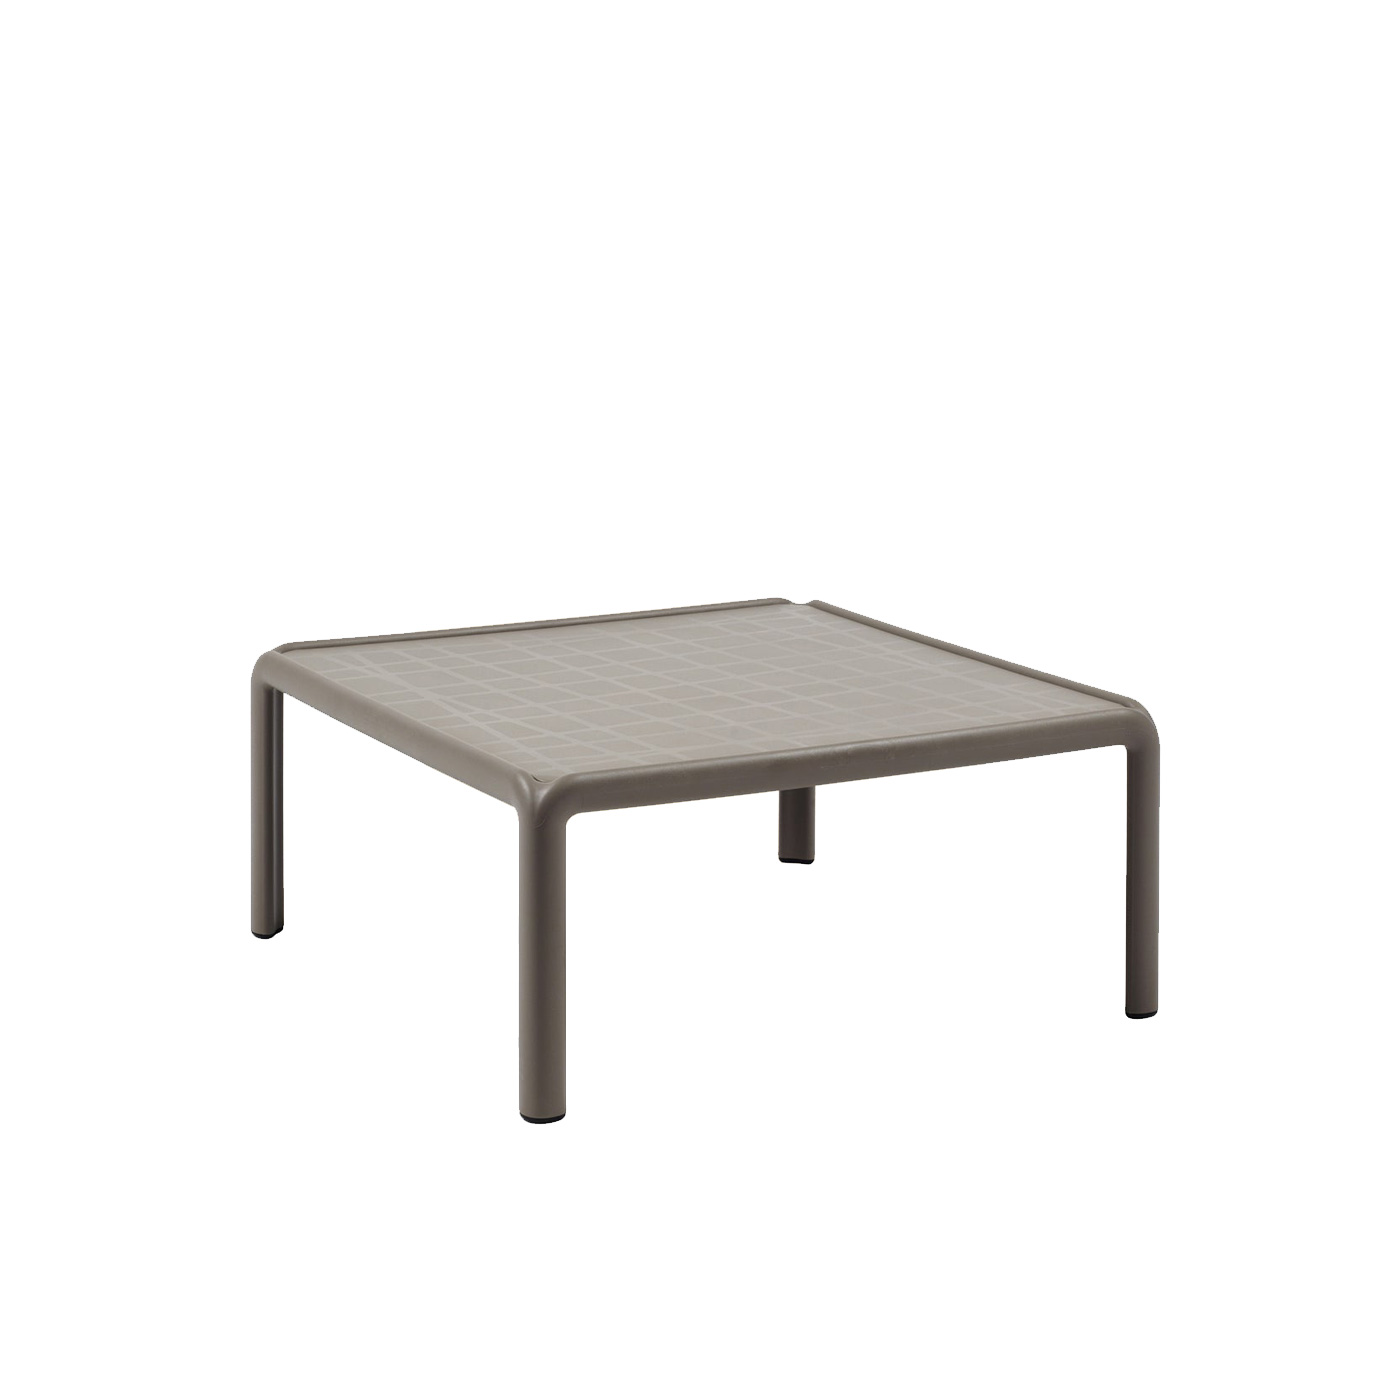 Komodo Coffee Table By Nardi Outdoor - Official UK stockist